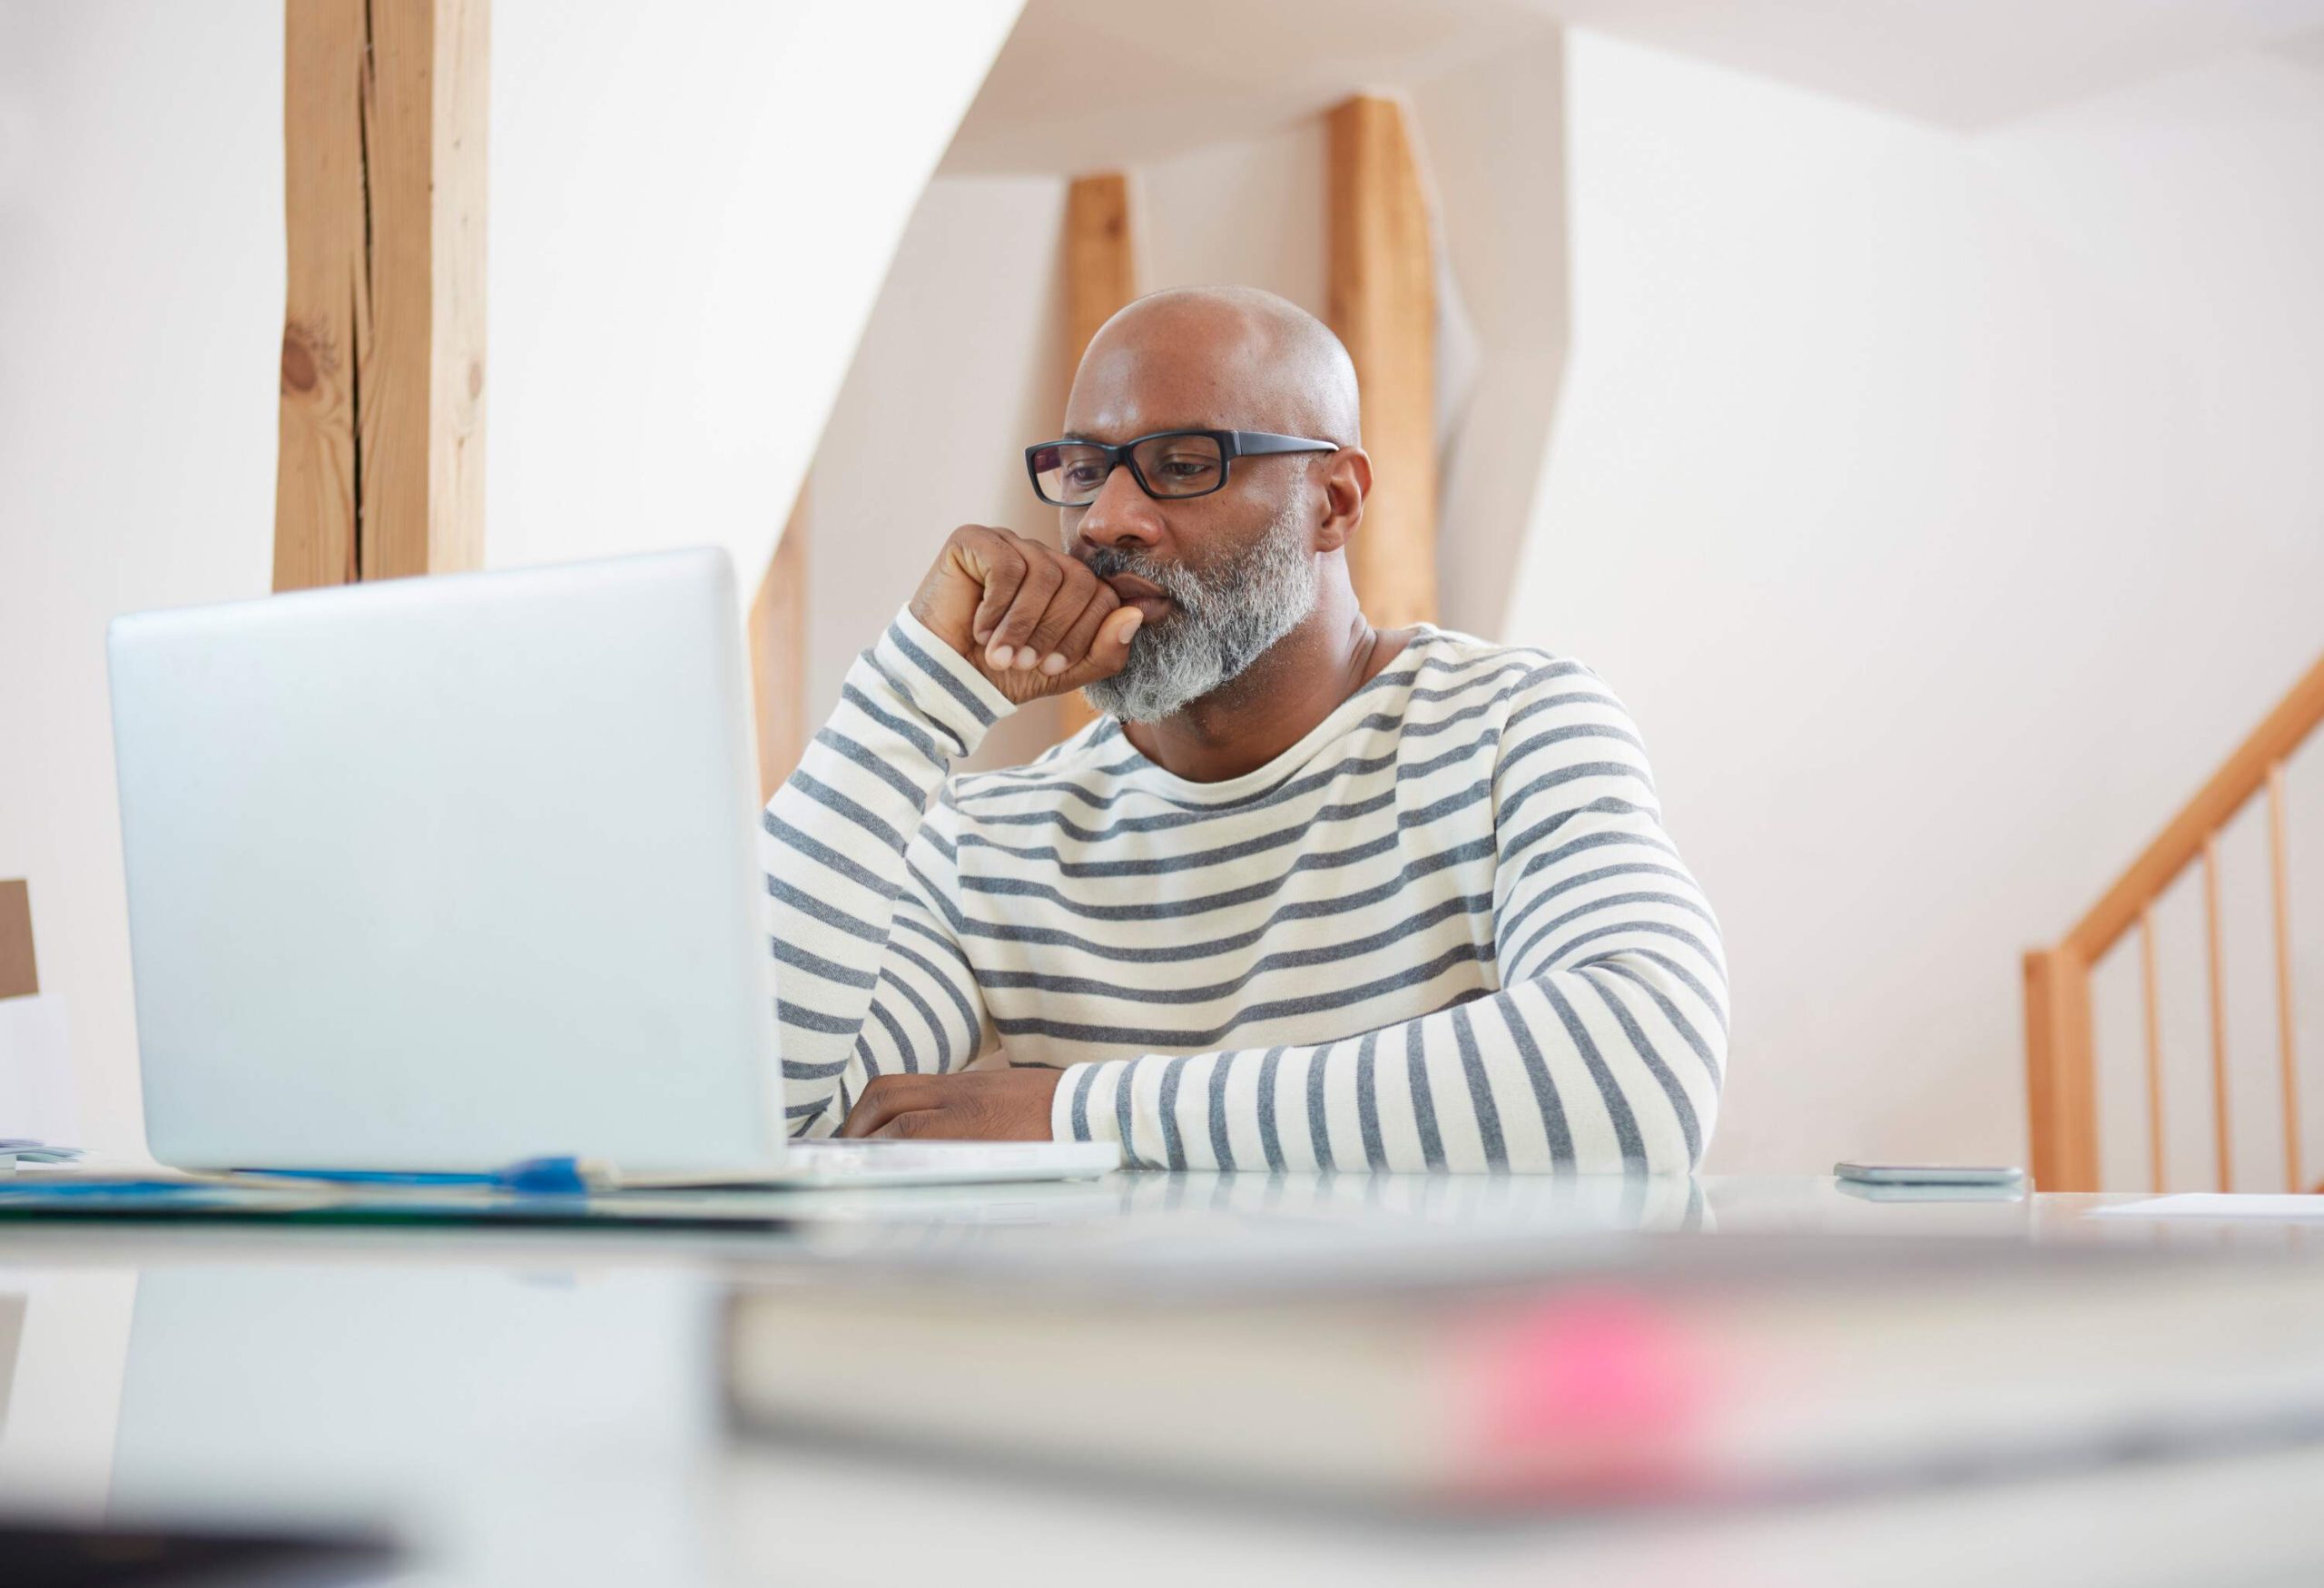 A bald man in glasses and striped sweater watches something on a white laptop.